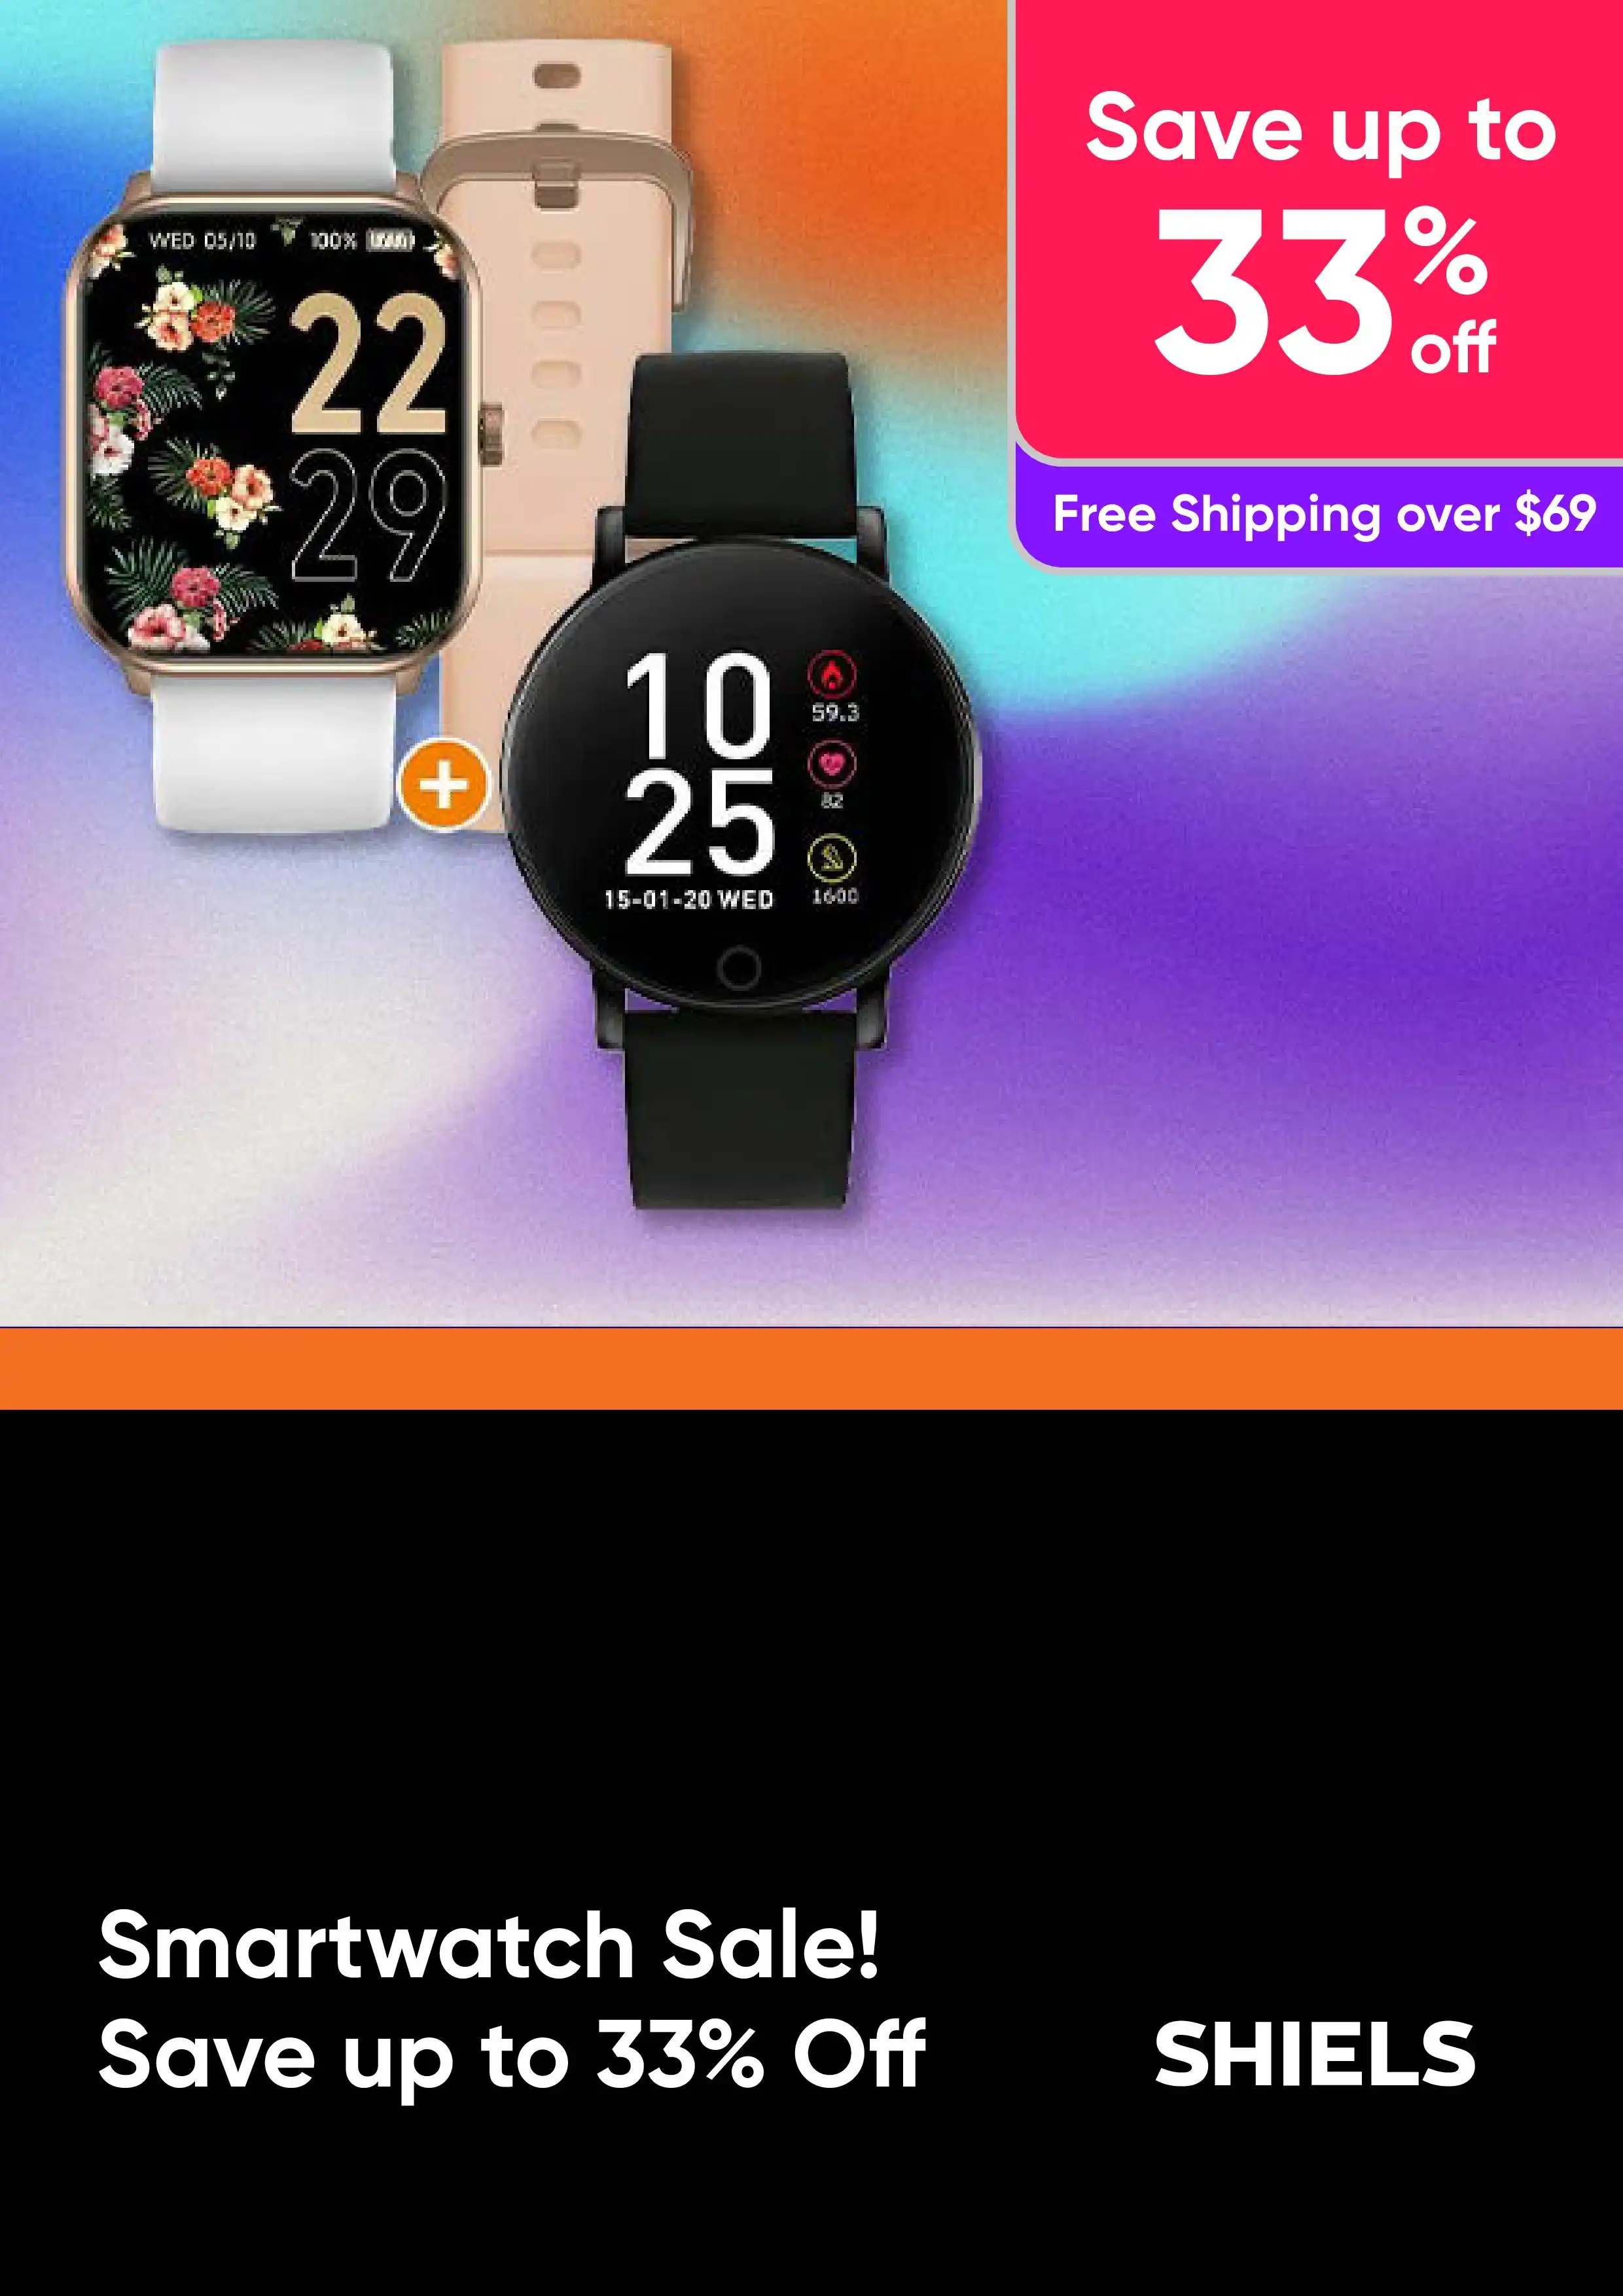 Smartwatch Sale! Save up to 33% Off